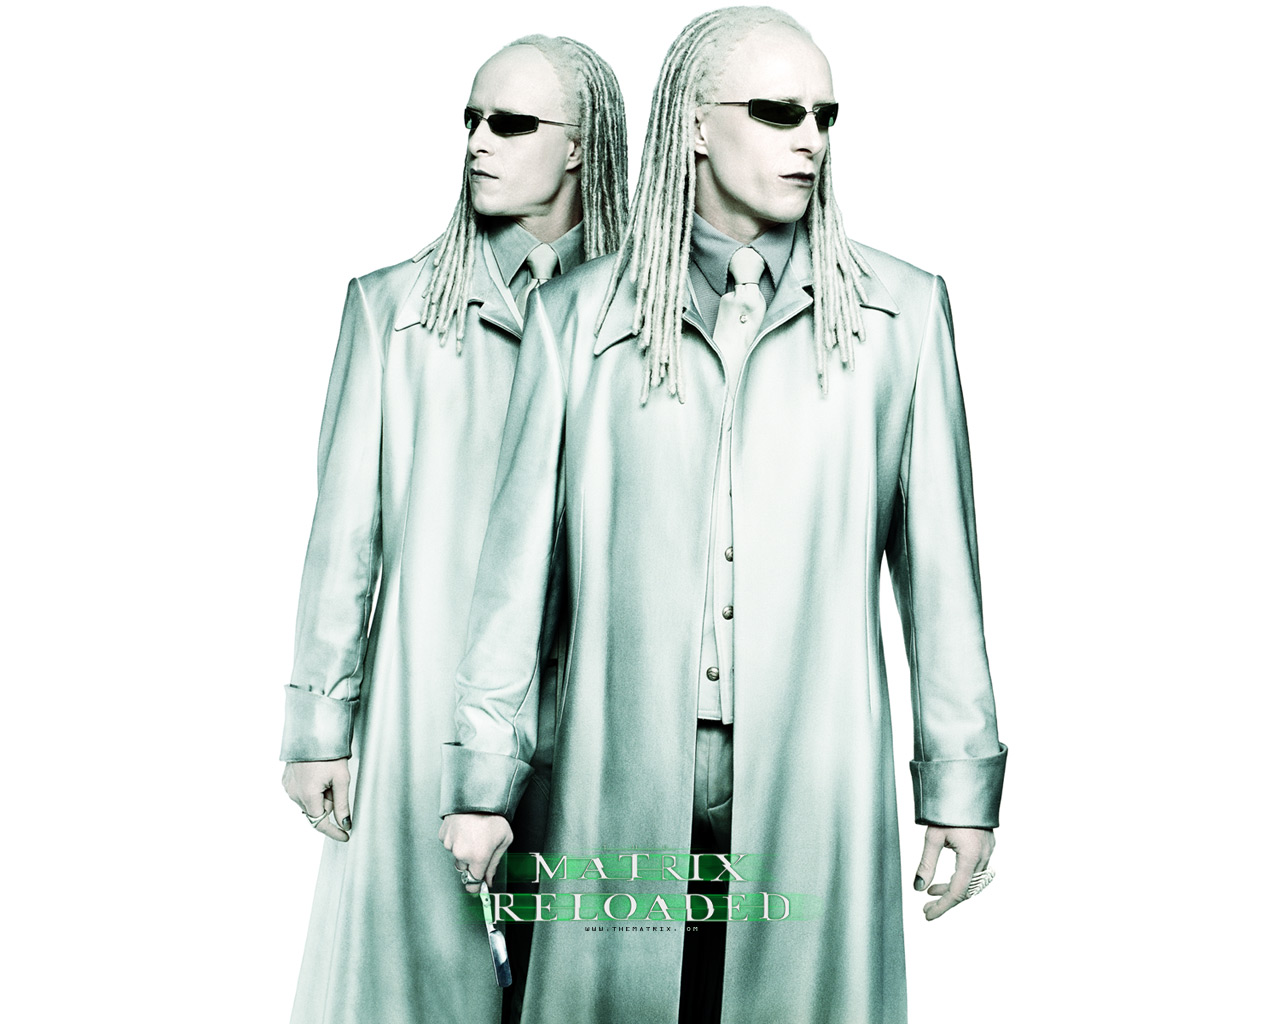 Popular The Matrix Reloaded Image for Phone